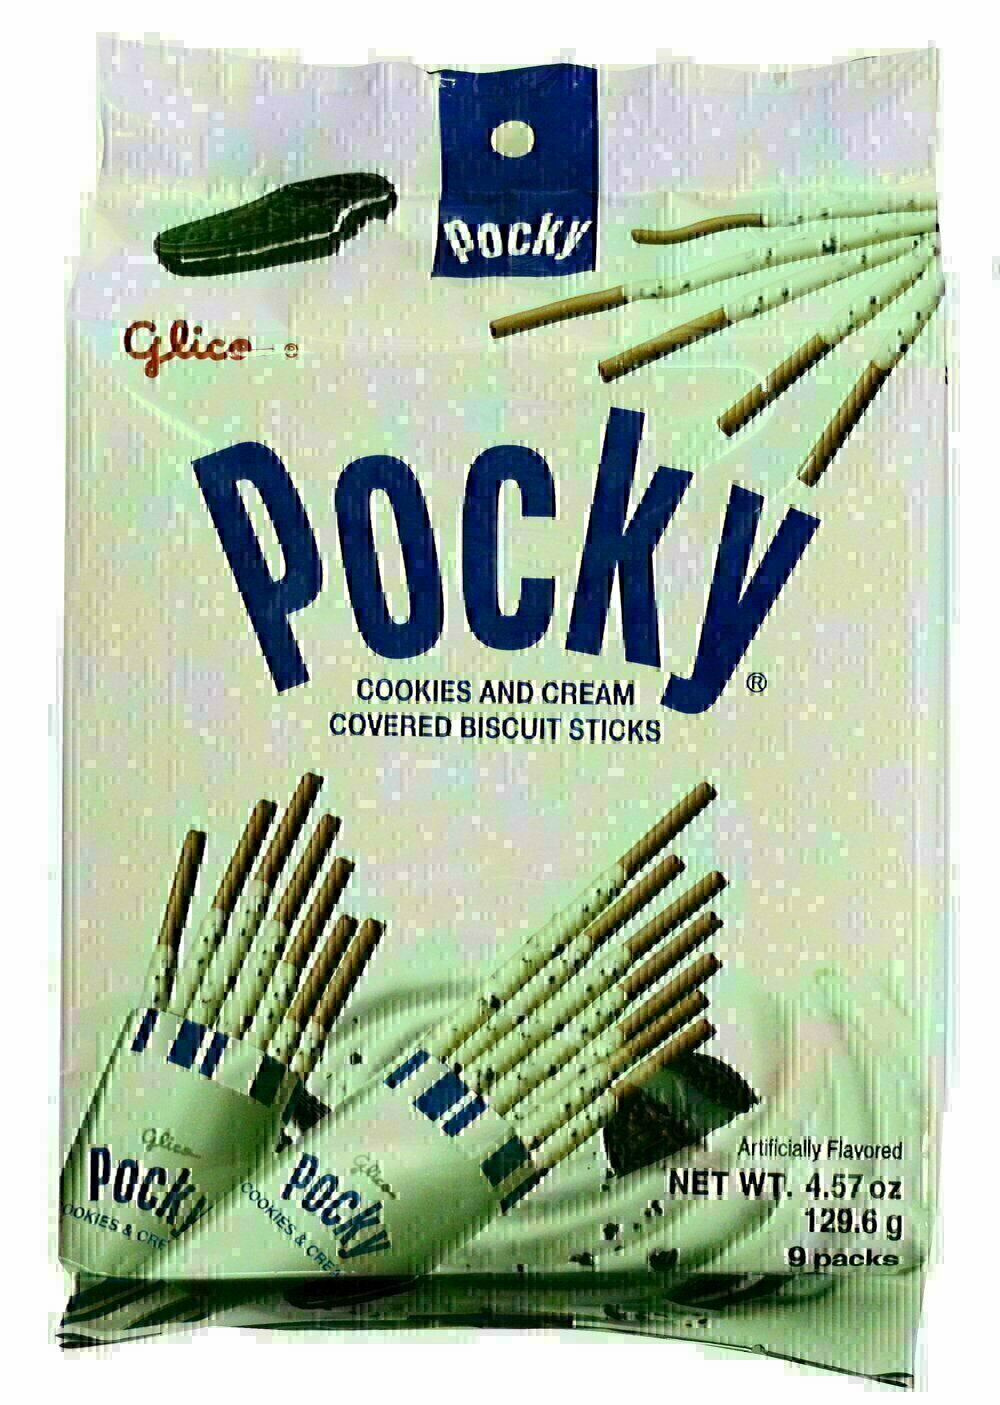 Pocky COOKIES AND CREAM COVERED BISCUIT STICKS ~129.6g（4.57oz） Pocky COOKIES AND CREAM COVERED BISCUIT STICKS 129.6 (4.57oz)